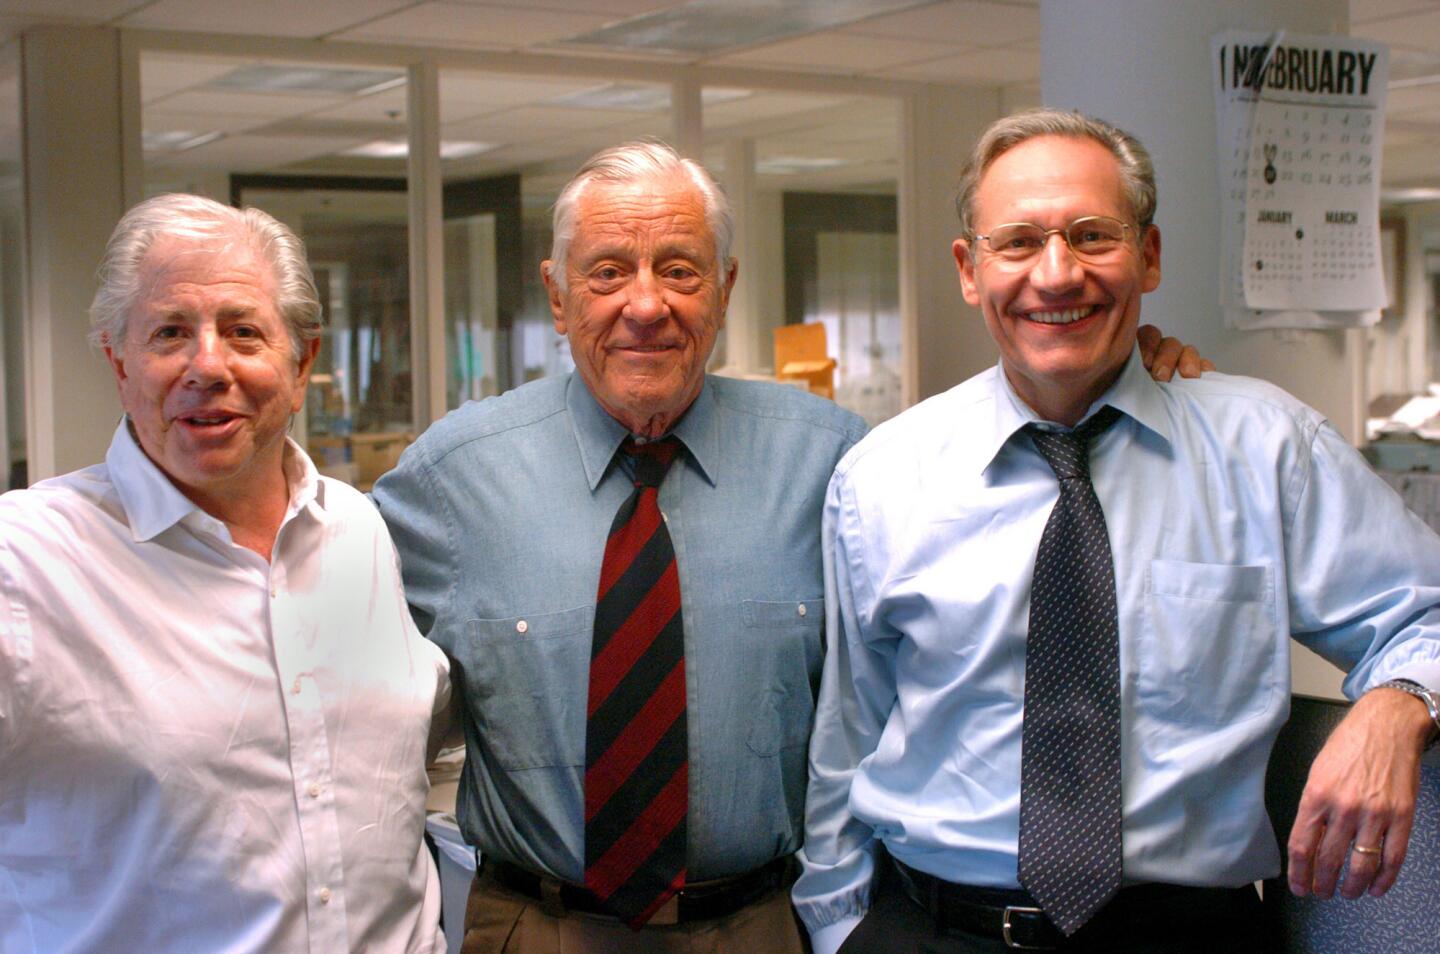 Former Washington Post reporter Carl Bernstein (left), who teamed with Bob Woodward (right) to break the Watergate scandal and write "All the President's Men," attended the University of Maryland. Additionally, Bernstein attended Montgomery Blair High School in Silver Spring, where he worked for the school's newspaper Silver Chips. Also pictured: Former Washington Post executive editor Ben Bradlee, center